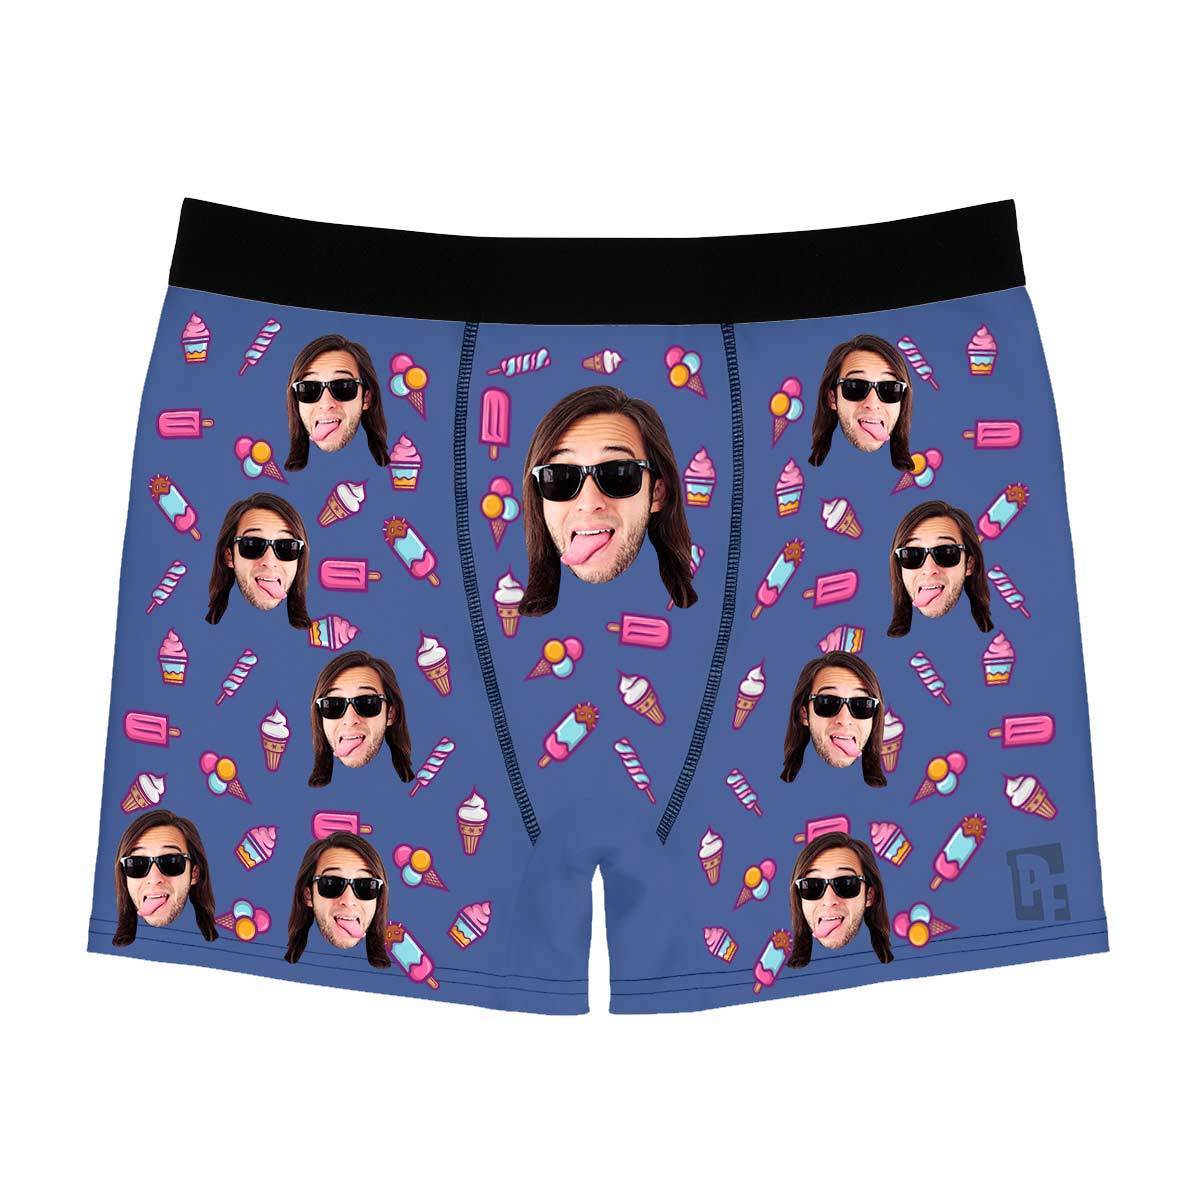 Darkblue Candies men's boxer briefs personalized with photo printed on them